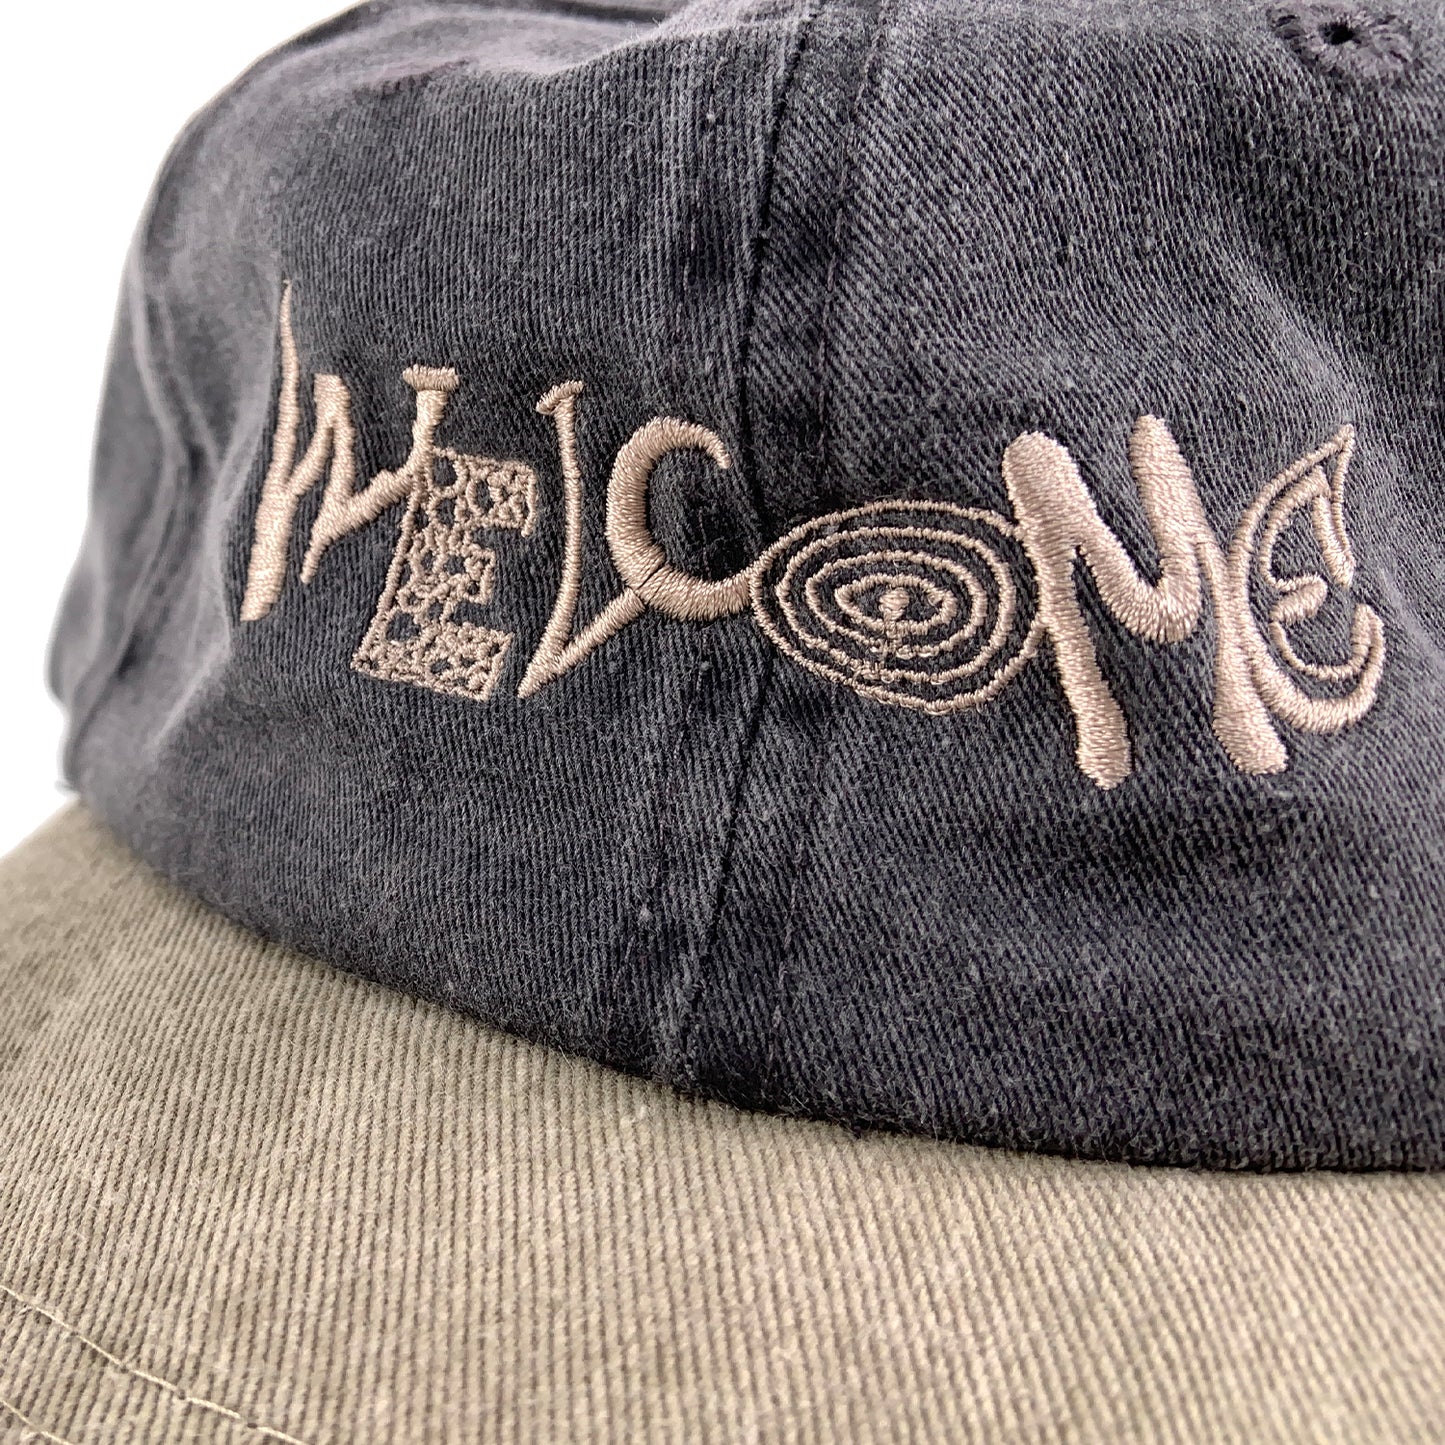 Welcome Medley Stone-Washed Hat - Black / Khaki - Prime Delux Store